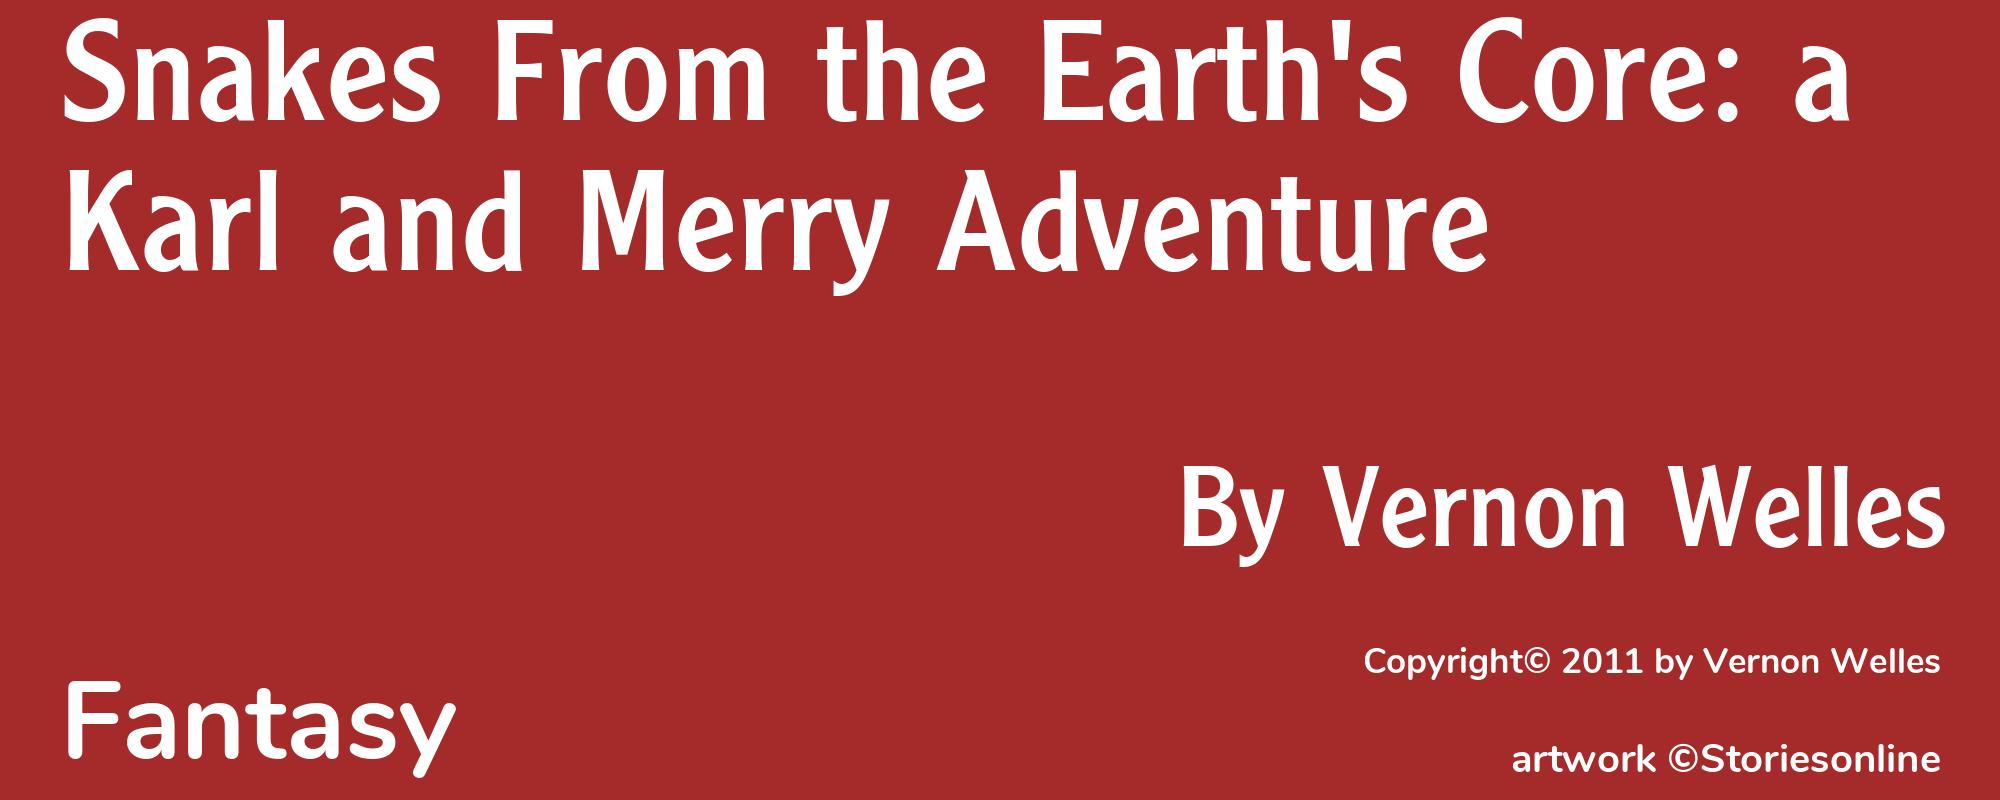 Snakes From the Earth's Core: a Karl and Merry Adventure - Cover